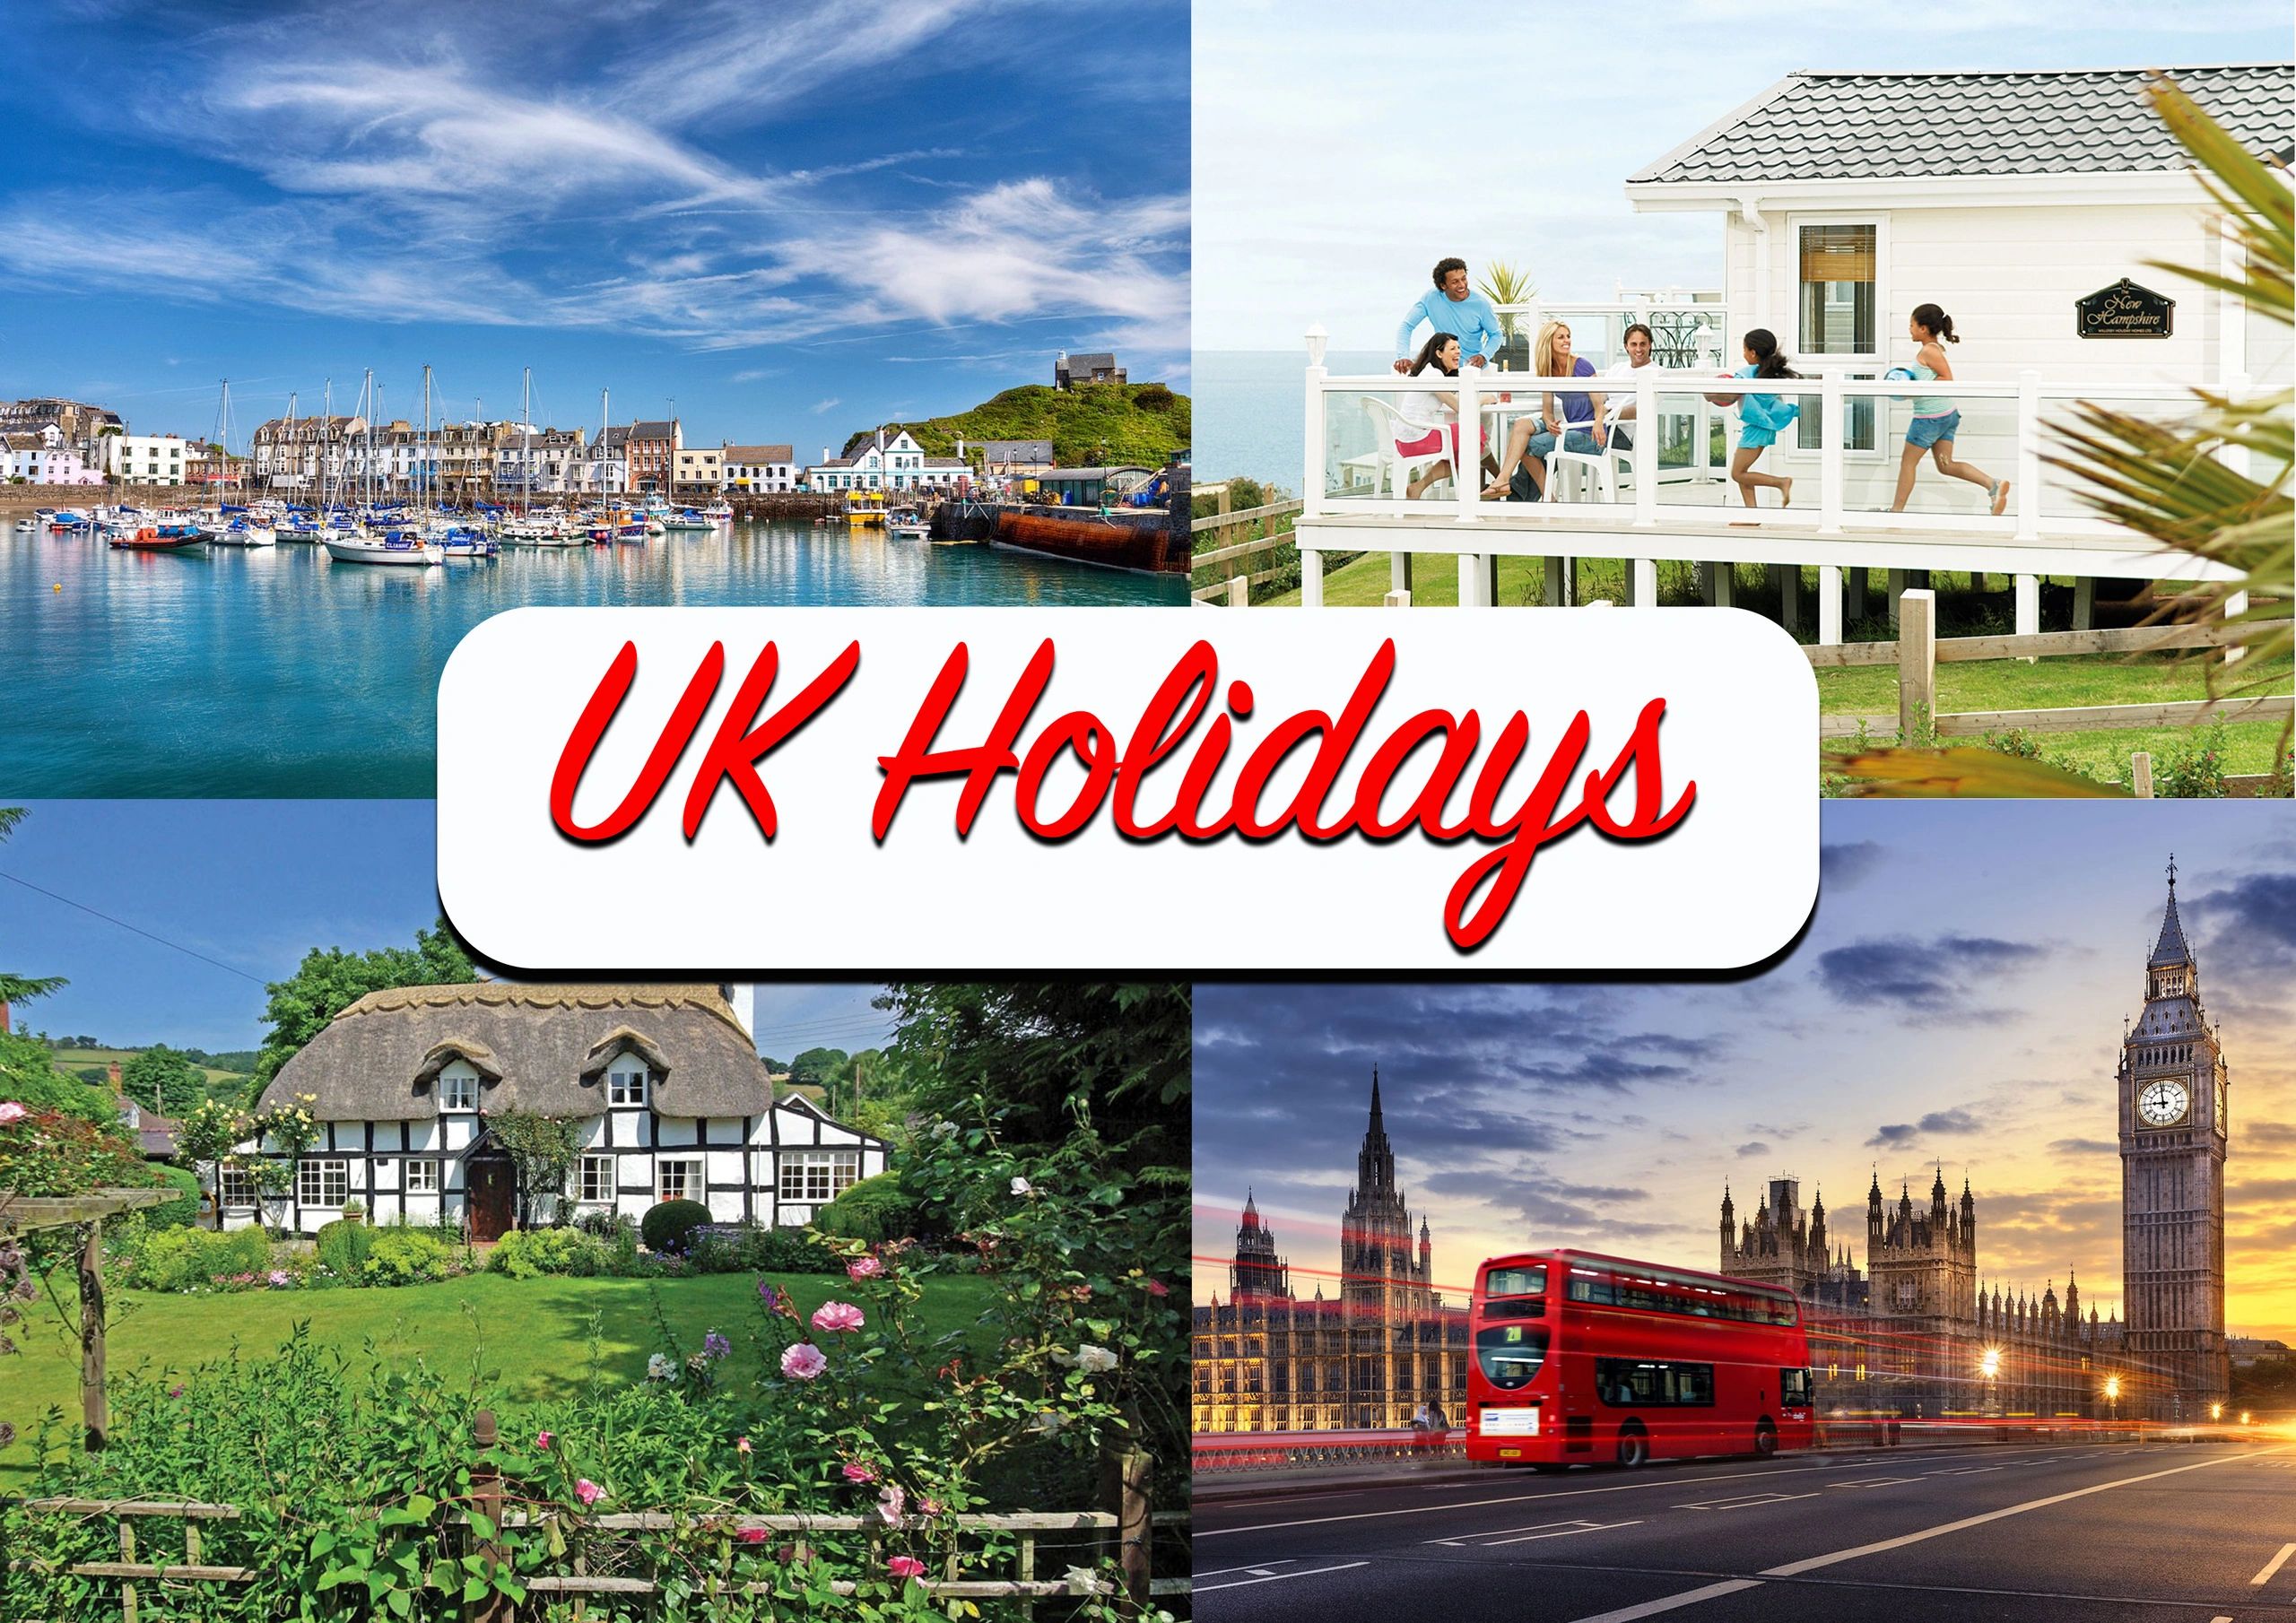 Holidays in your country. National Holidays in the uk. Holidays in United Kingdom. British Bank Holidays. Public Holidays in uk.